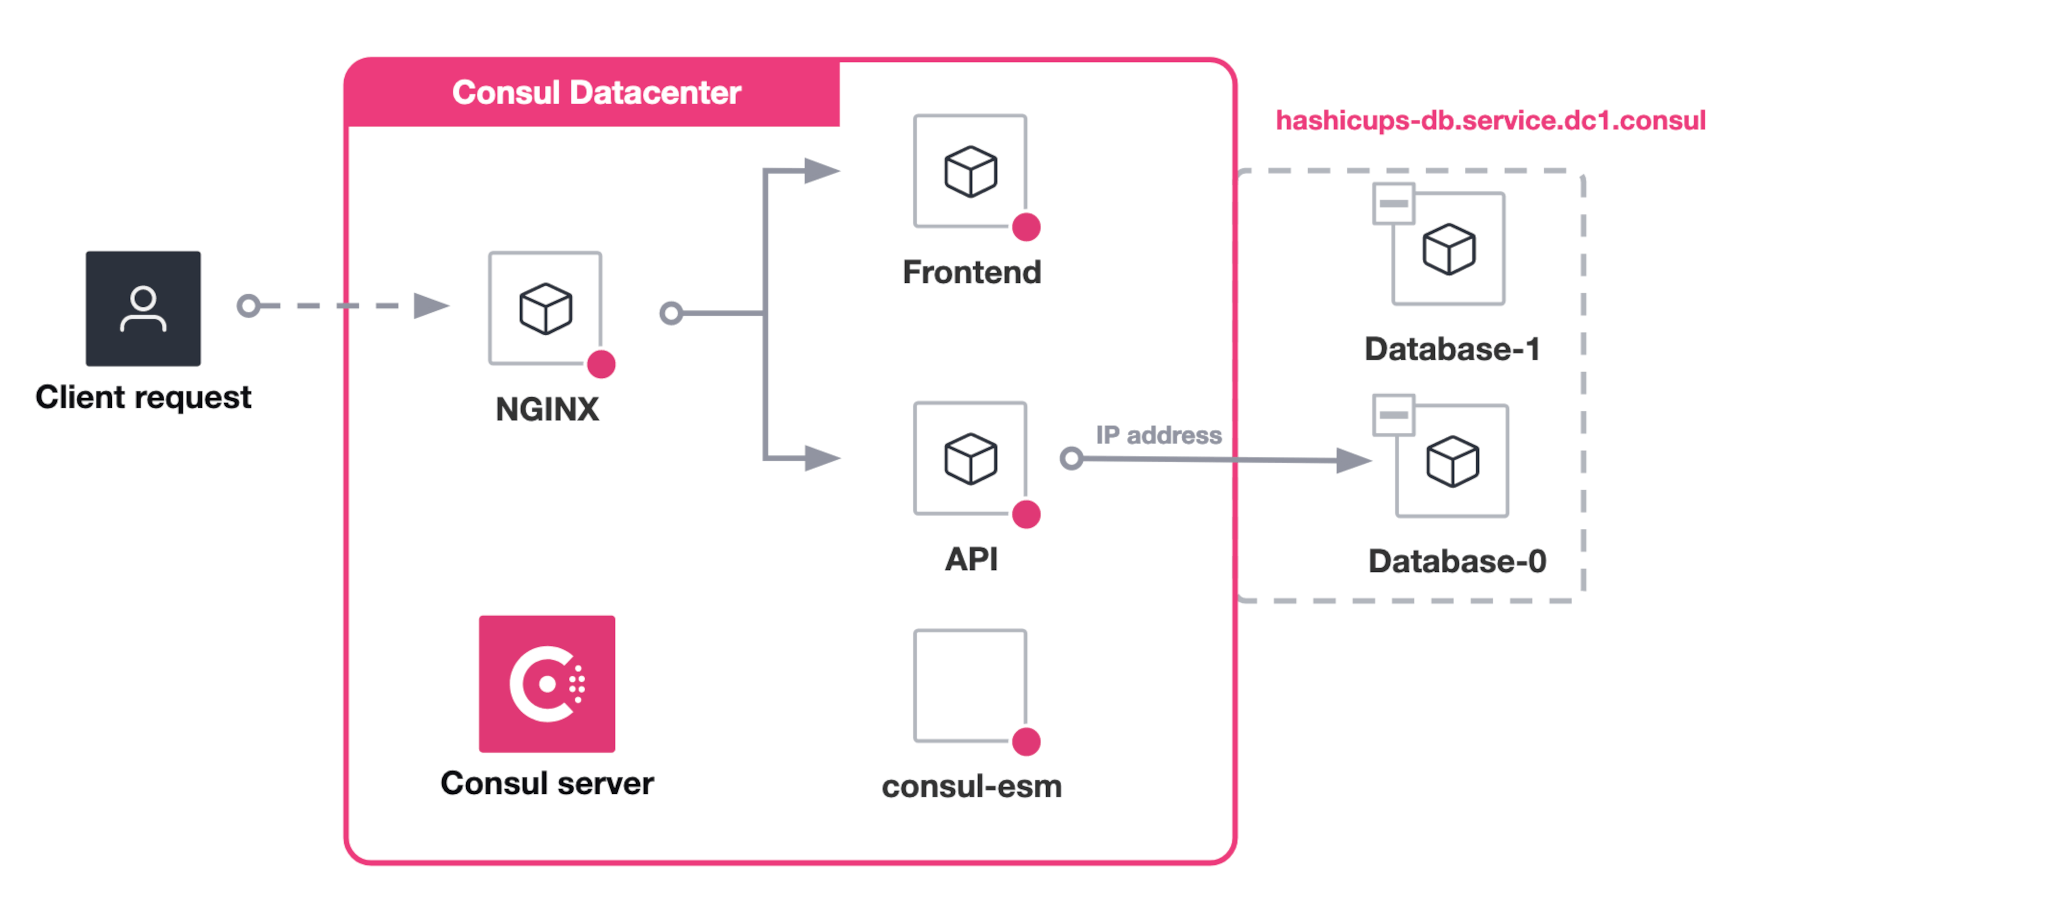 Architecture diagram. The two database nodes outside the Consul datacenter are registered with Consul. They share a Consul DNS address for load balancing, but they do not report their health status.